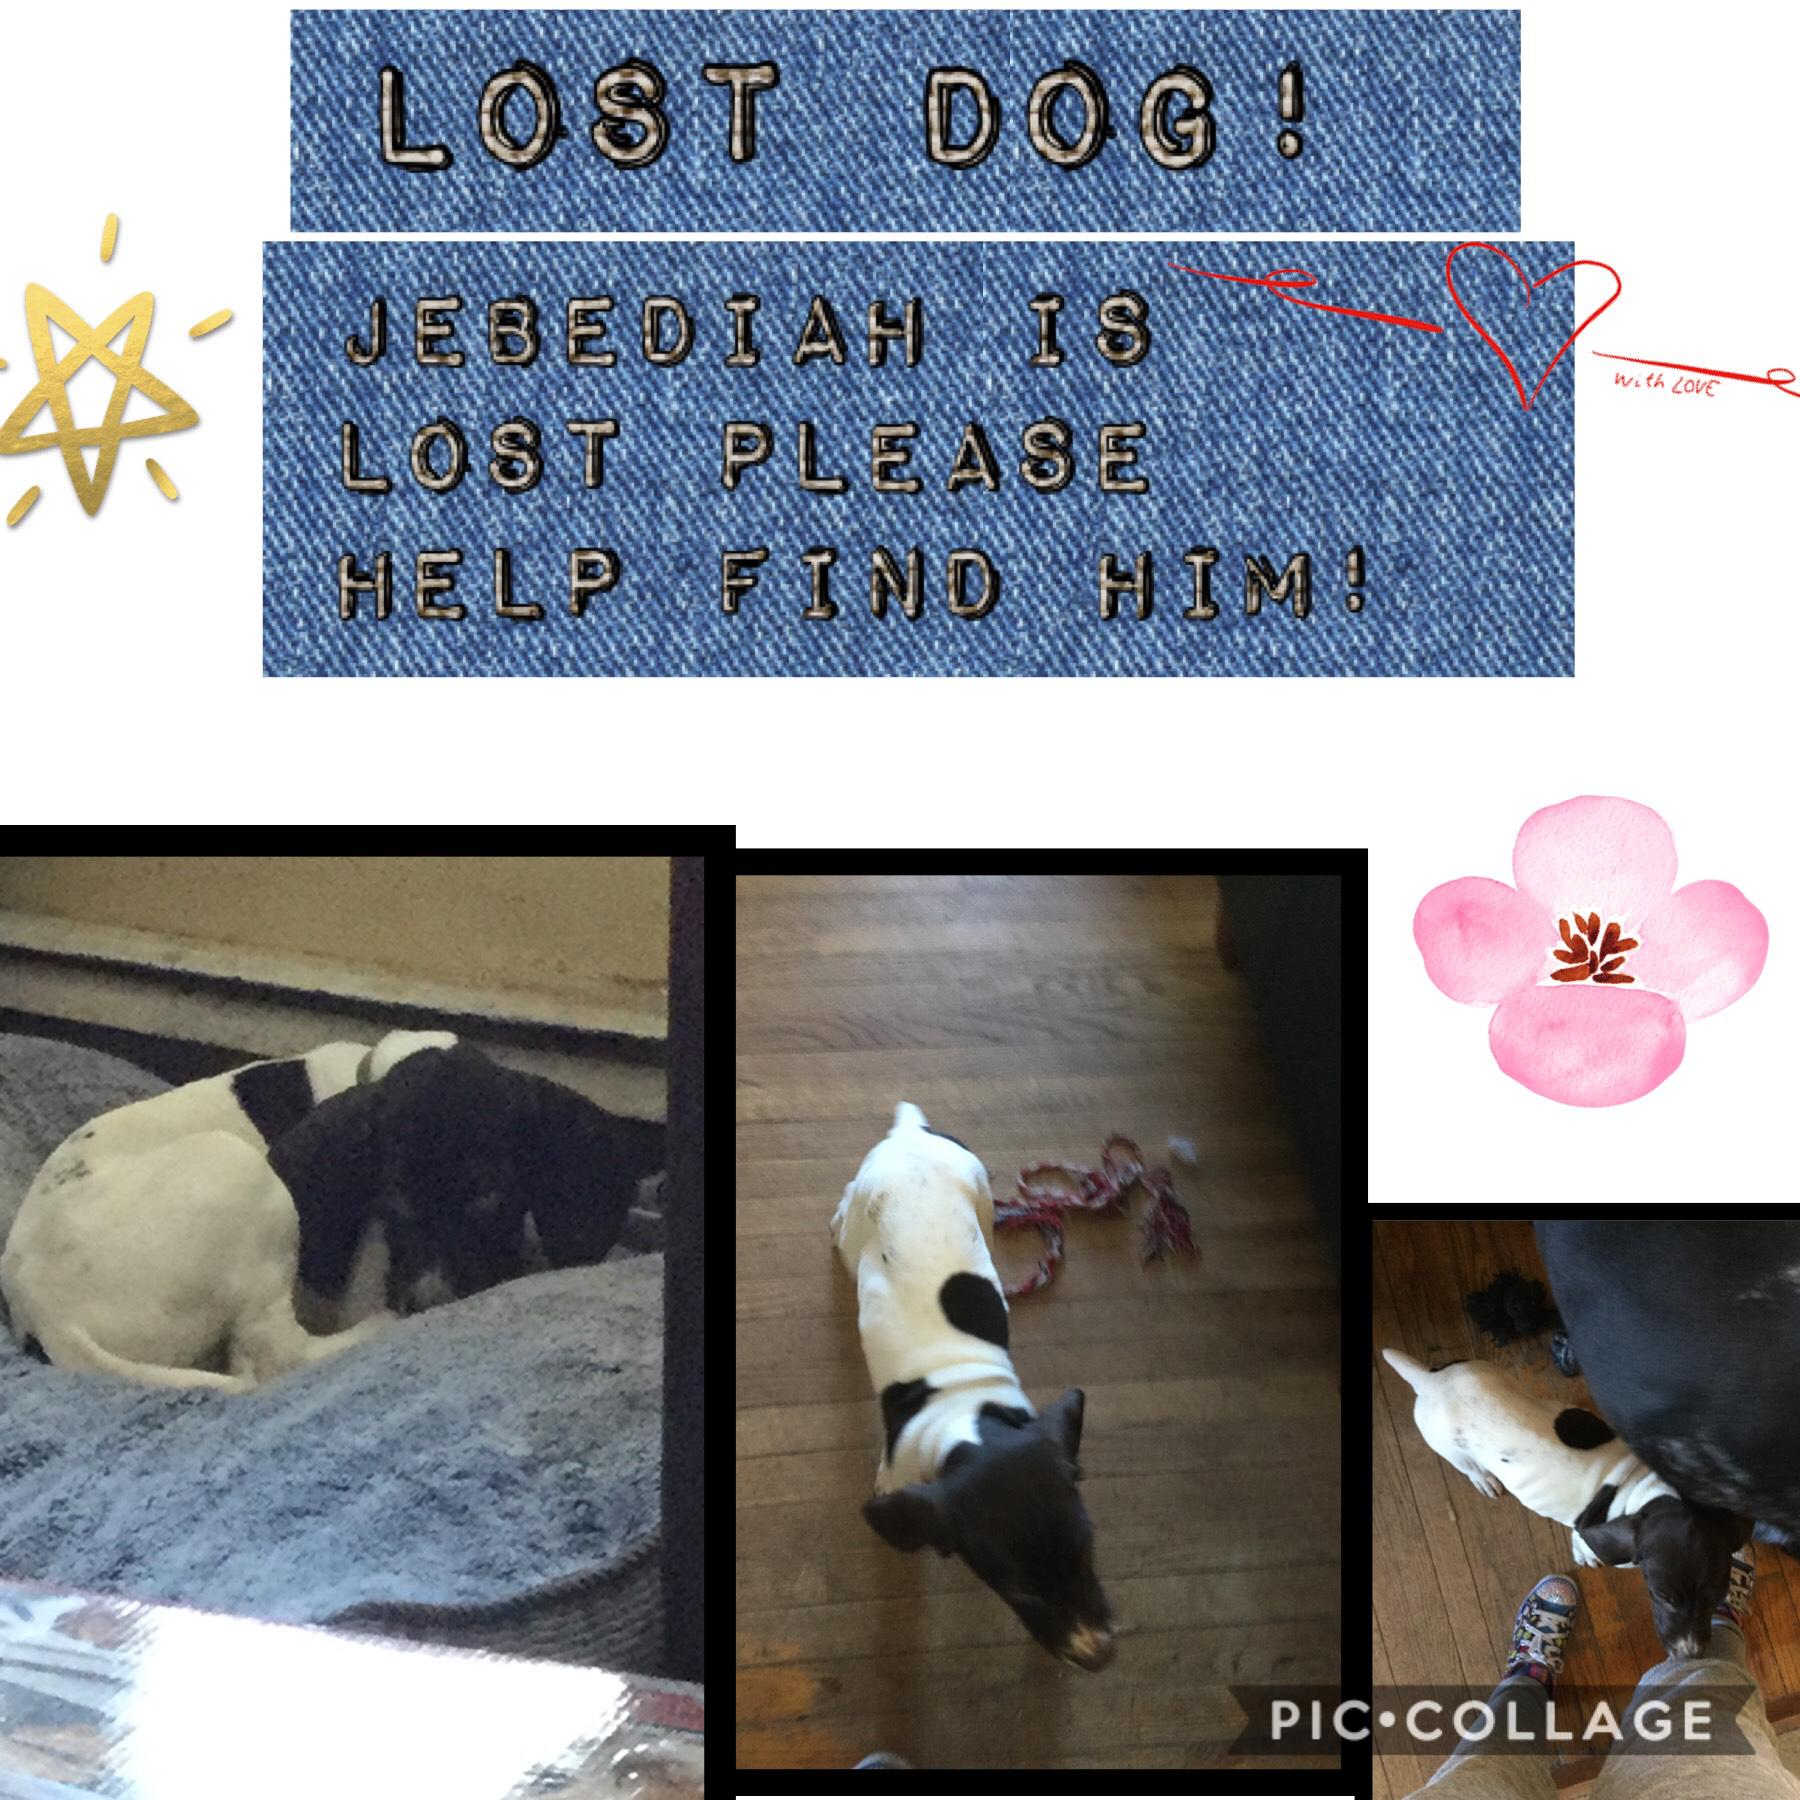 LOST DOG! This is real please help!